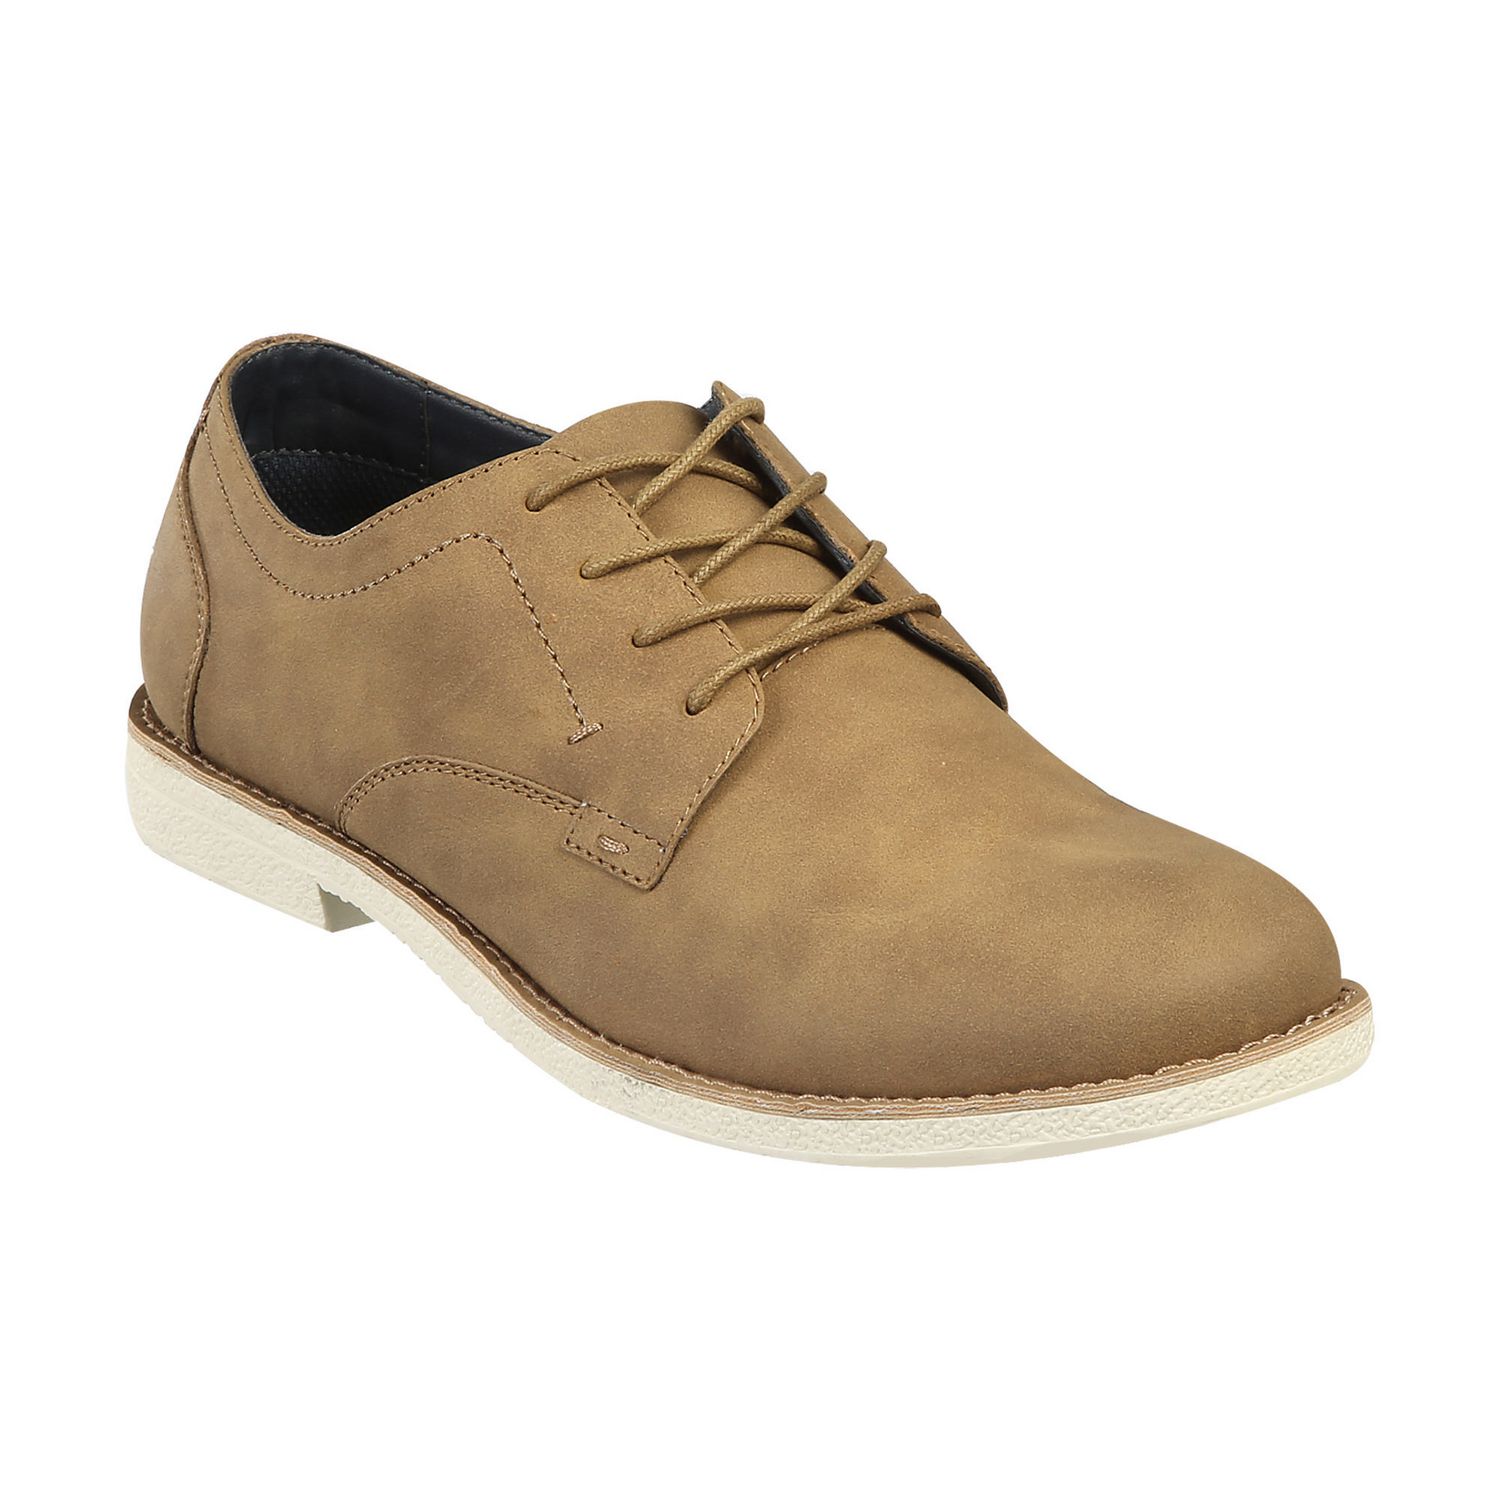 George Men's Lace-Up Casual Shoes | Walmart Canada